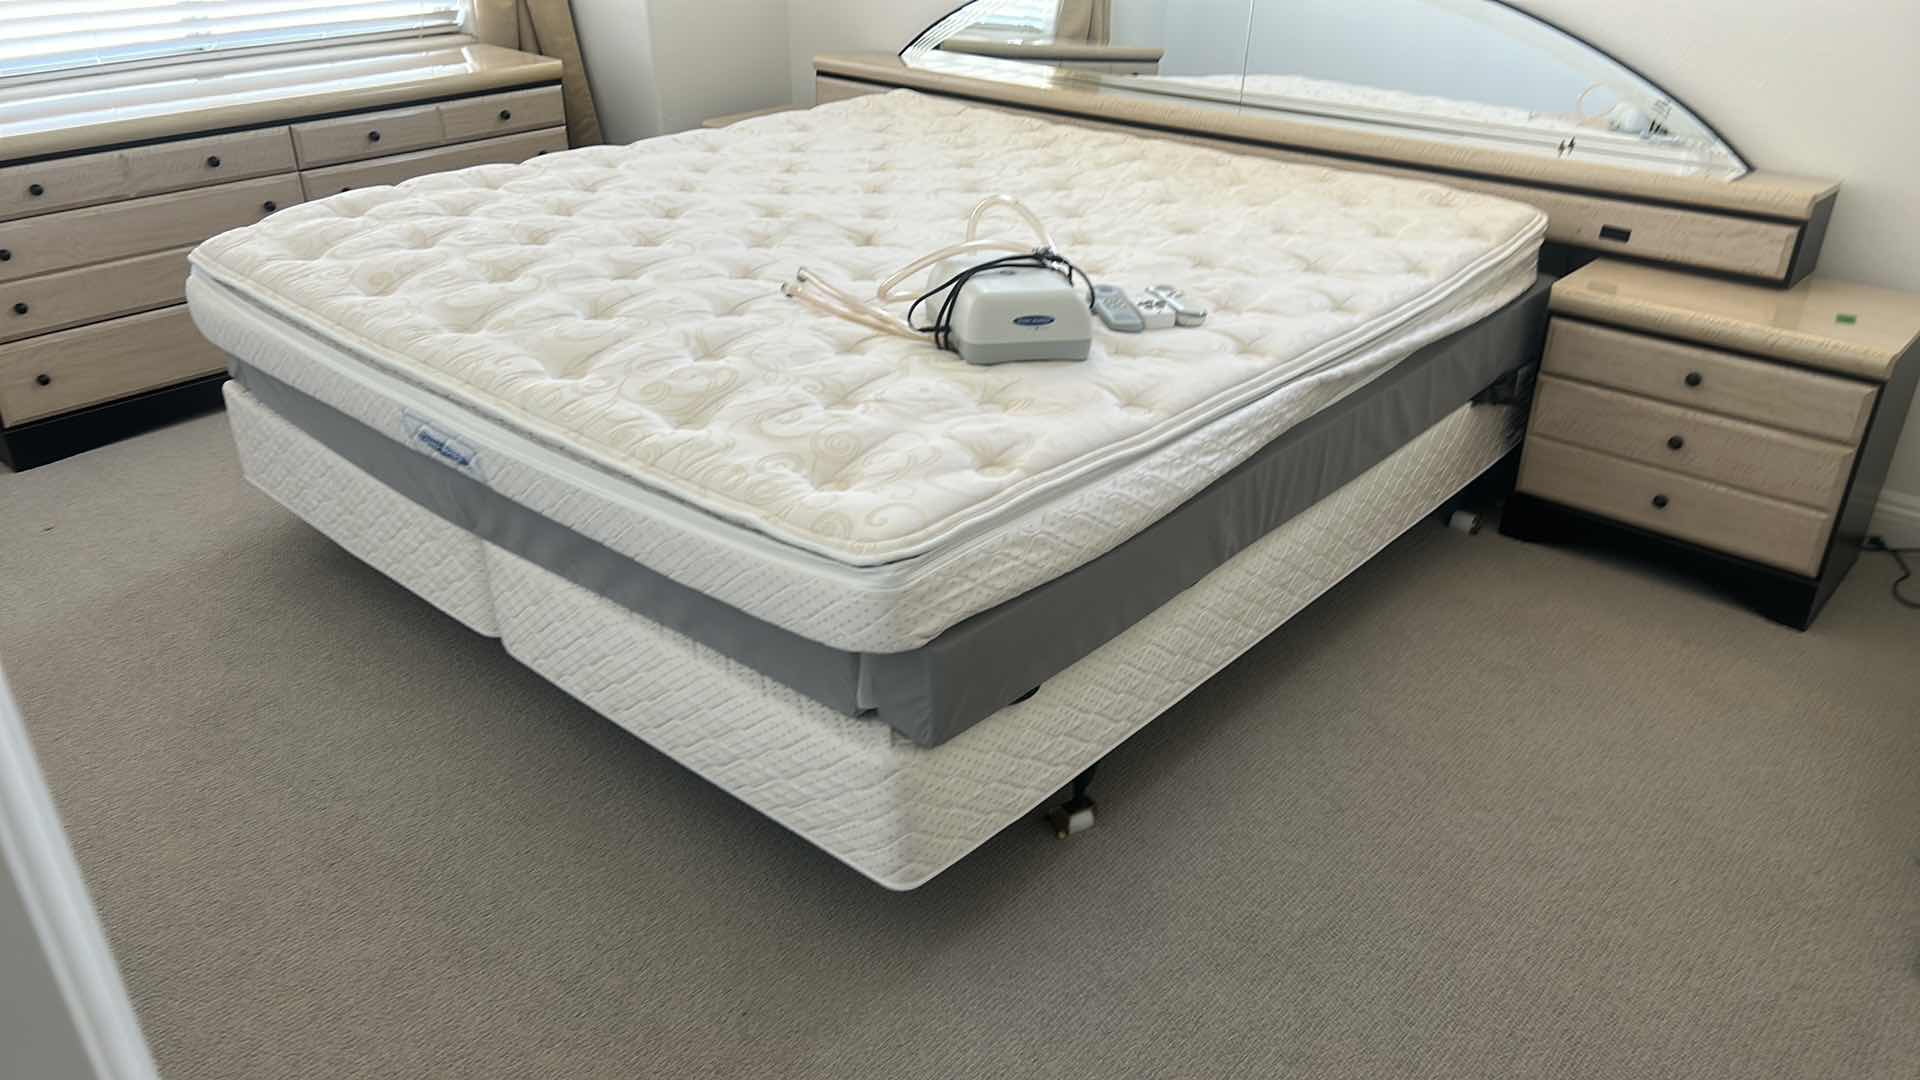 Photo 1 of SLEEP NUMBER EASTERN KING MATTRESS, BOX SPRINGS AND FOAM AIR INFLATED FILLED LAYER ( ALL ELSE SOLD SEPARATELY)